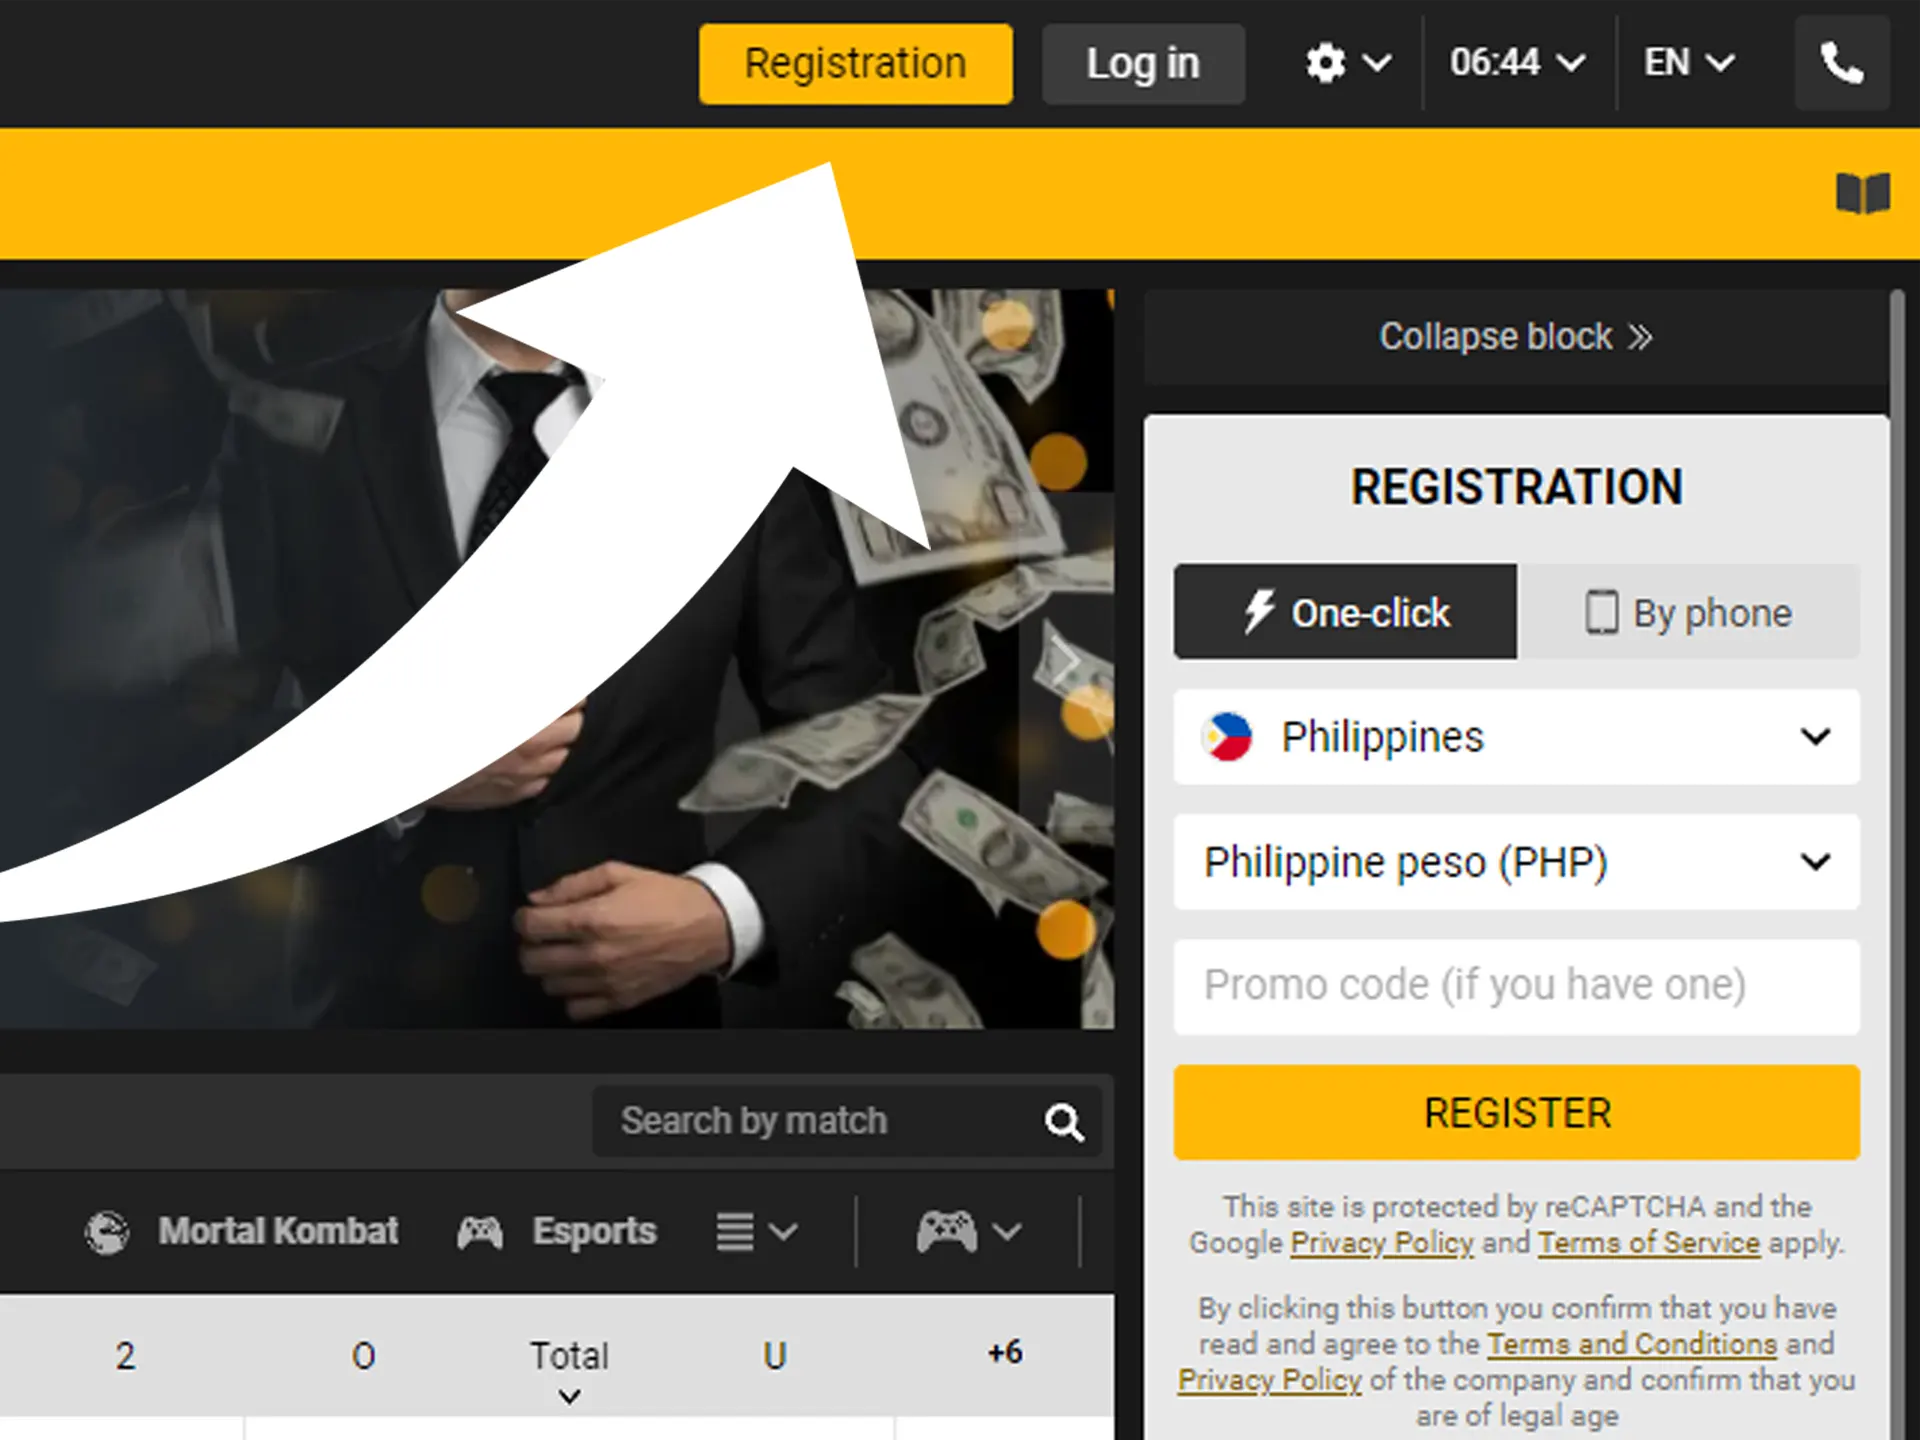 Search for registration method on main page.